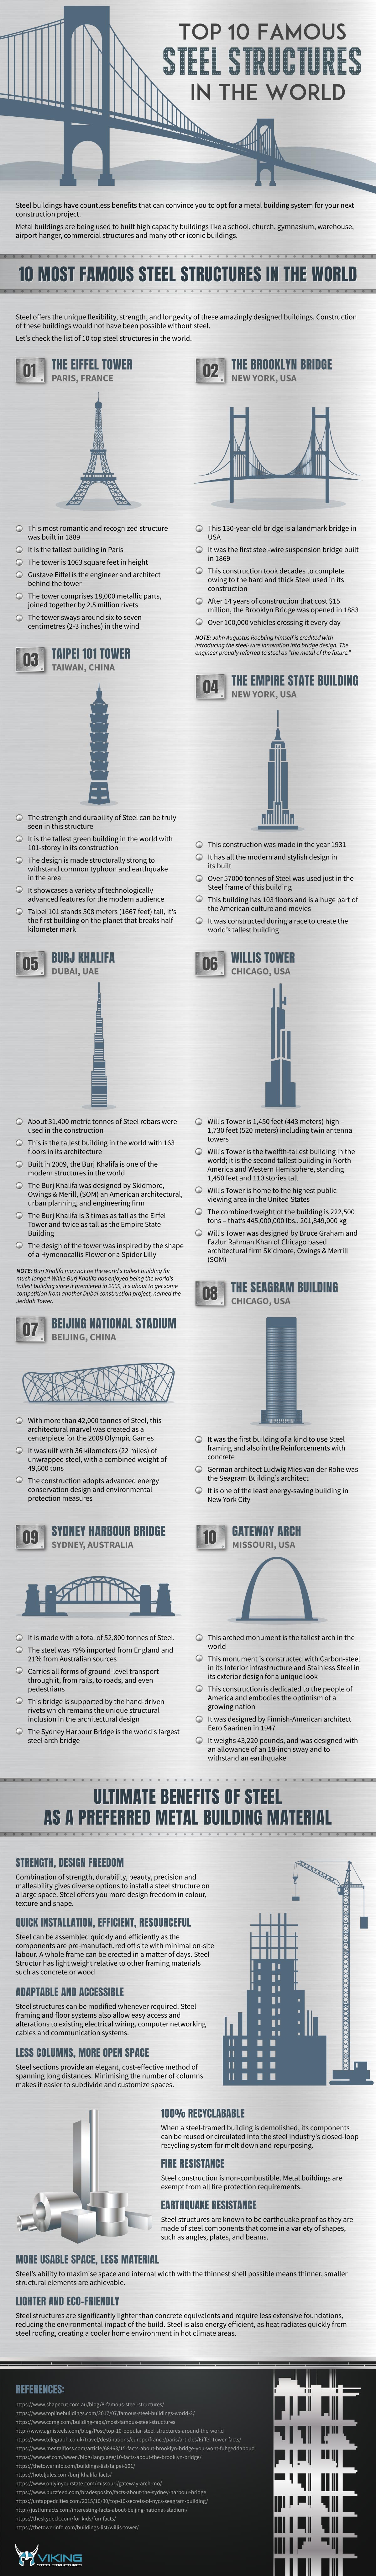 famous steel structures infographic